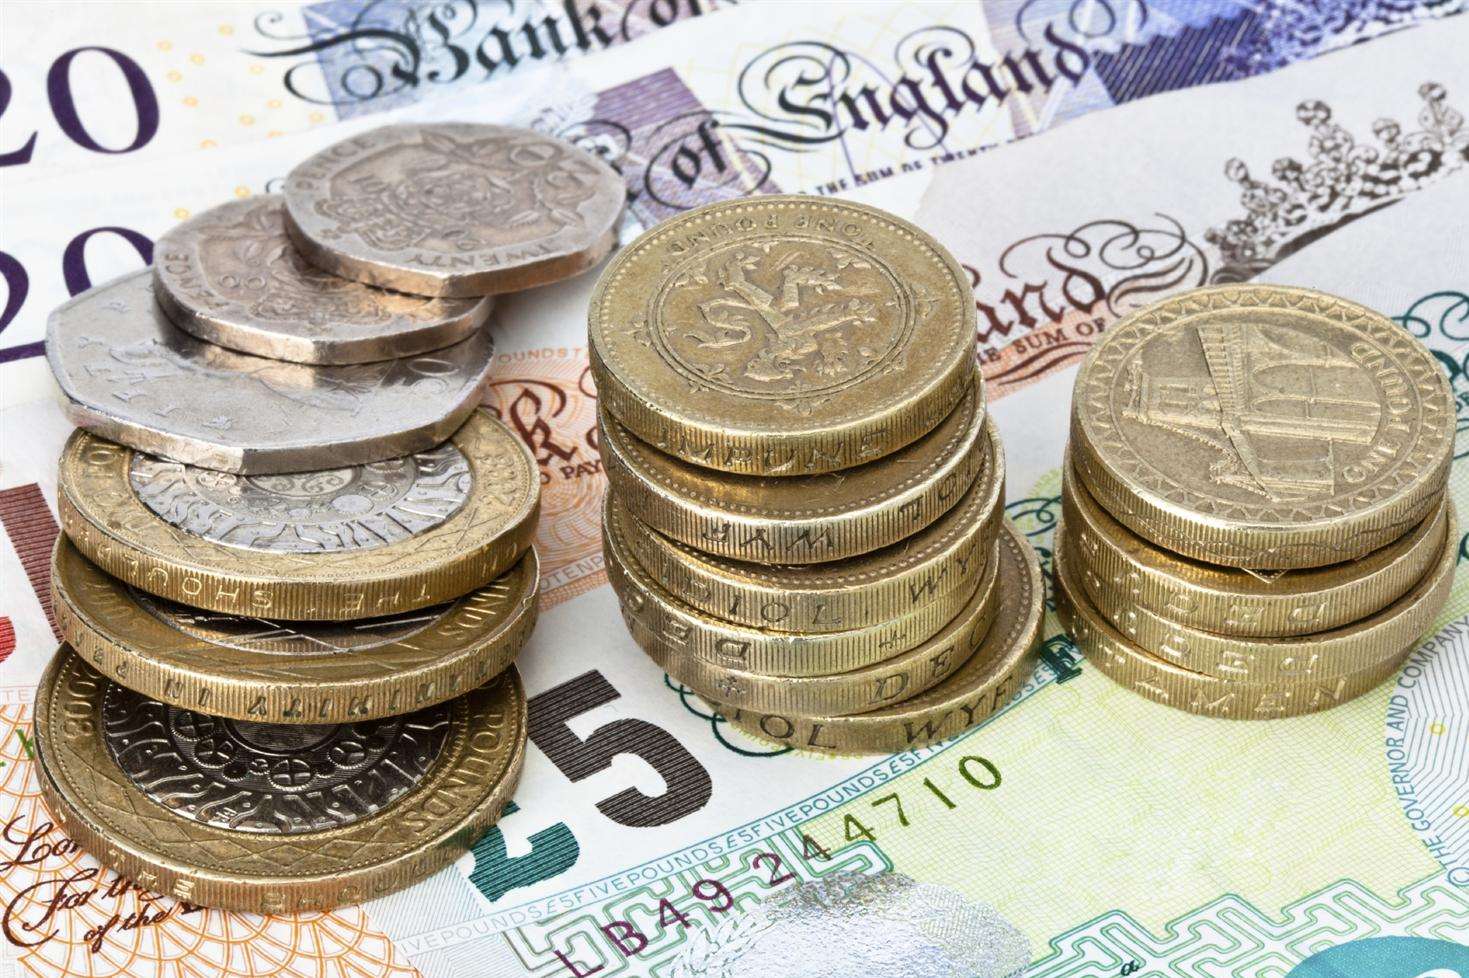 Maidstone Borough Council has wiped off the debts of 17 companies amounting to £273,273